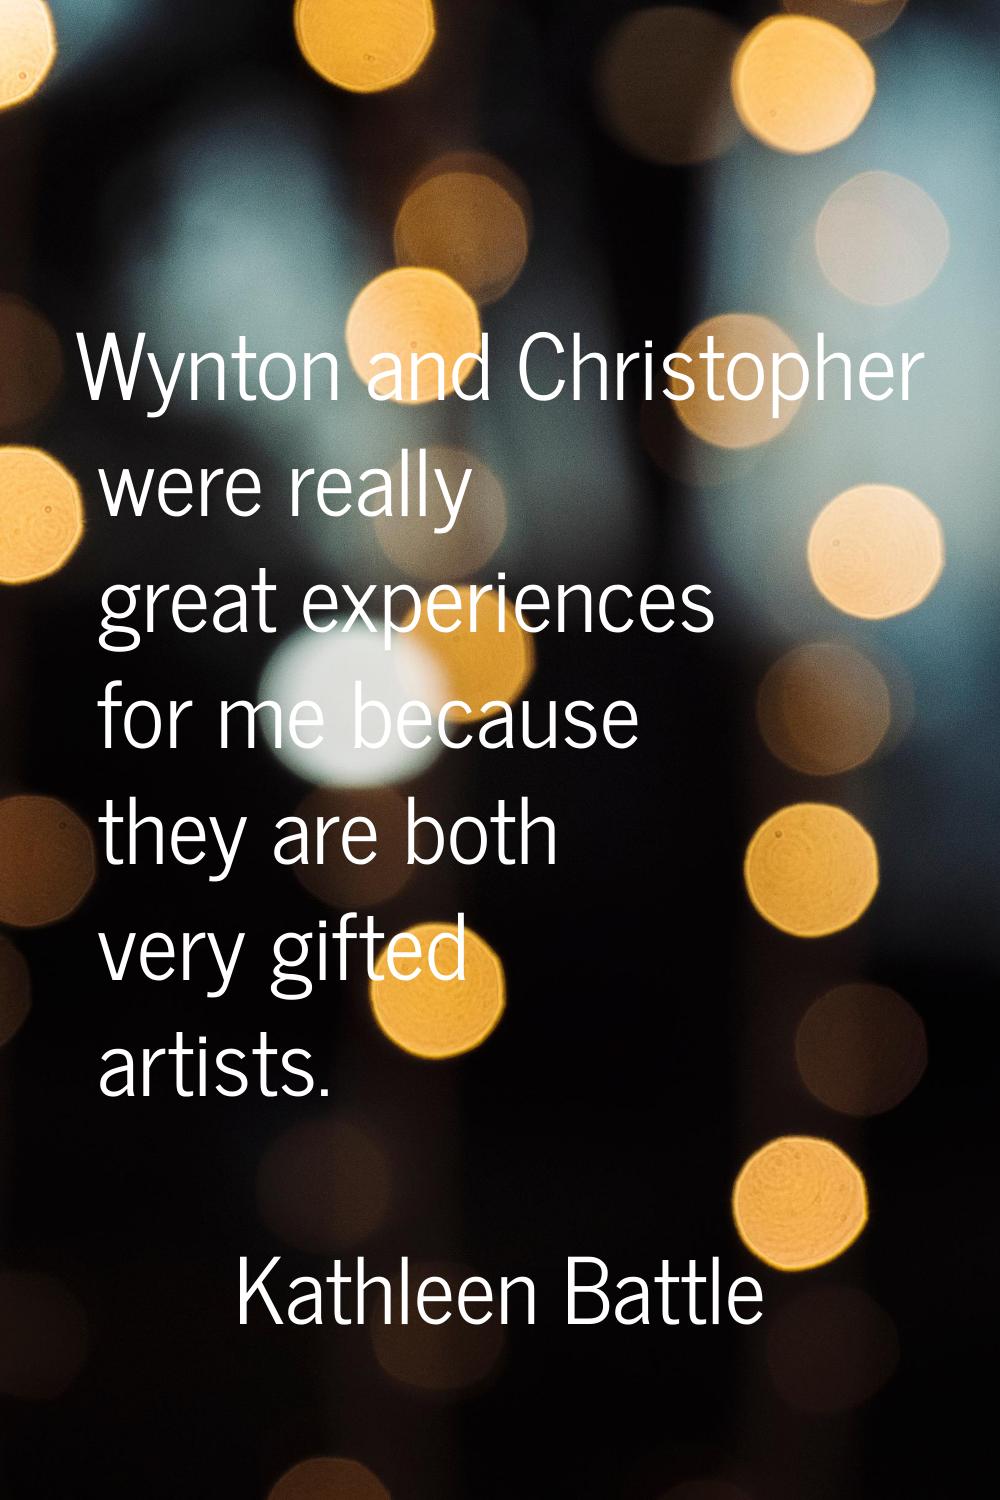 Wynton and Christopher were really great experiences for me because they are both very gifted artis